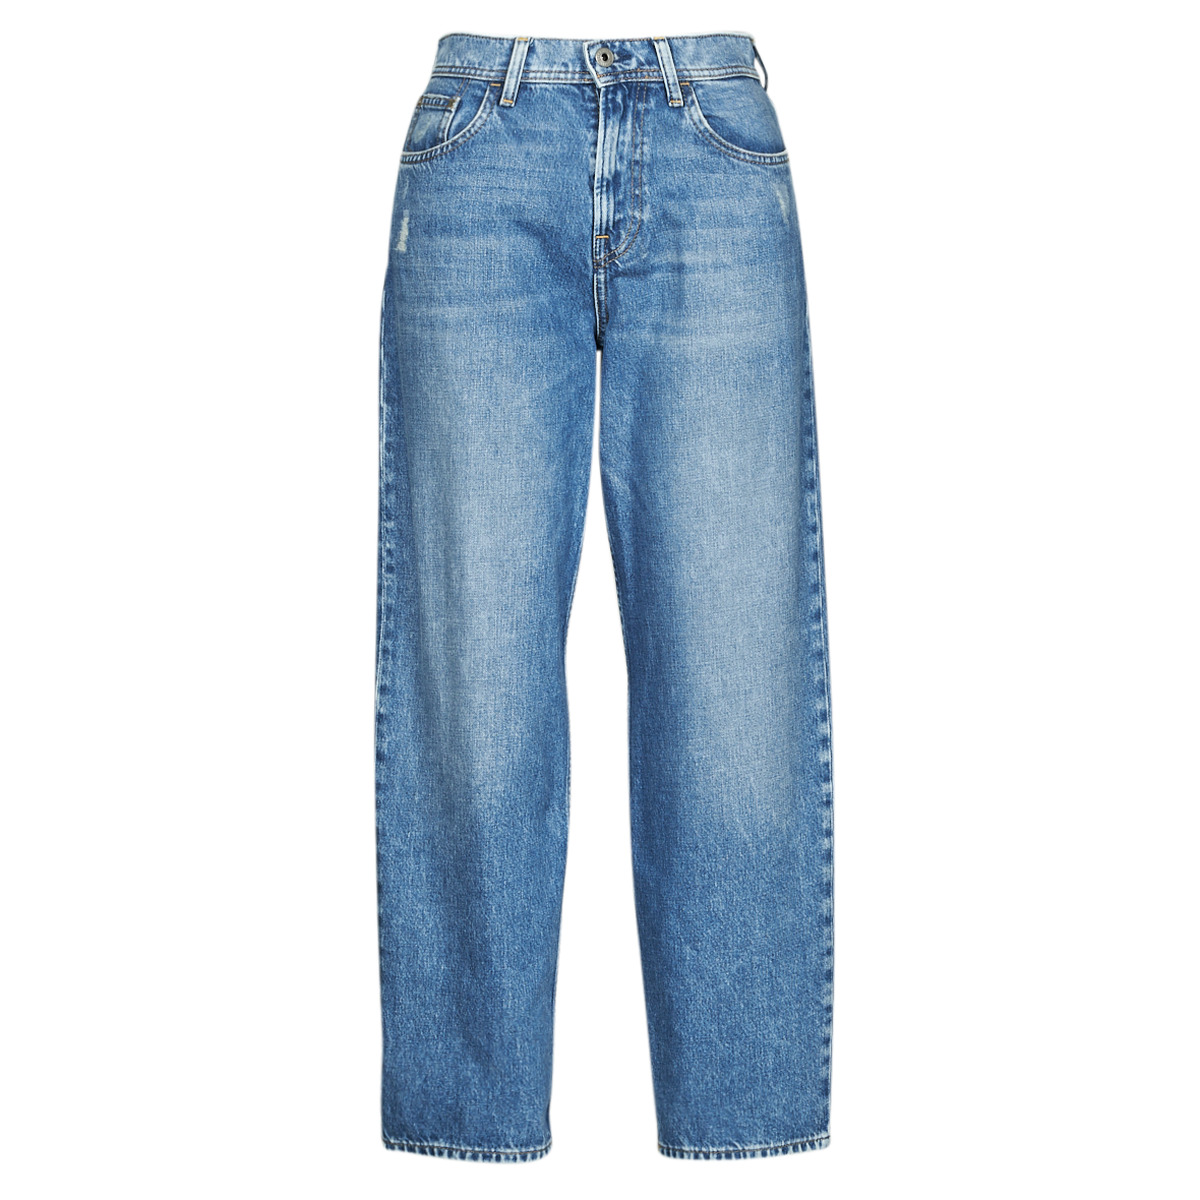 Pepe jeans  Tζιν σε ίσια γραμή Pepe jeans DOVER